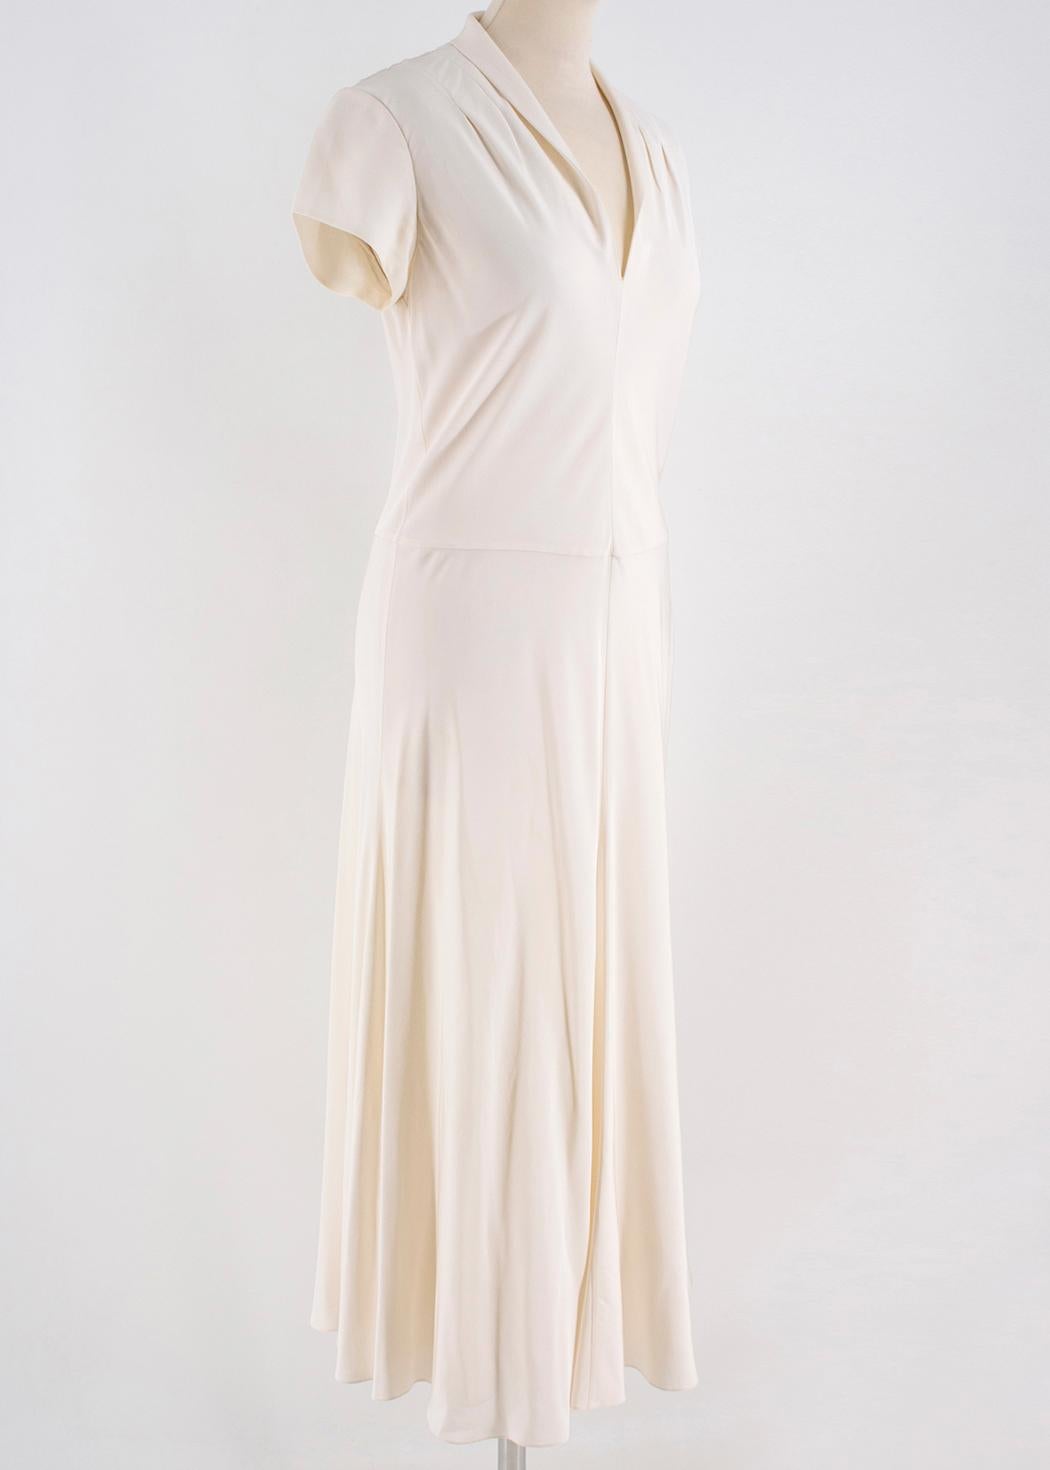 Ralph Lauren Collection Cream Silk Fluted Dress 

- Cream Silk Dress
- From Collection
- V-neck, short sleeved 
- A-line Style 
- Fully lined 
- 100% Silk 

Please note, these items are pre-owned and may show some signs of storage, even when unworn